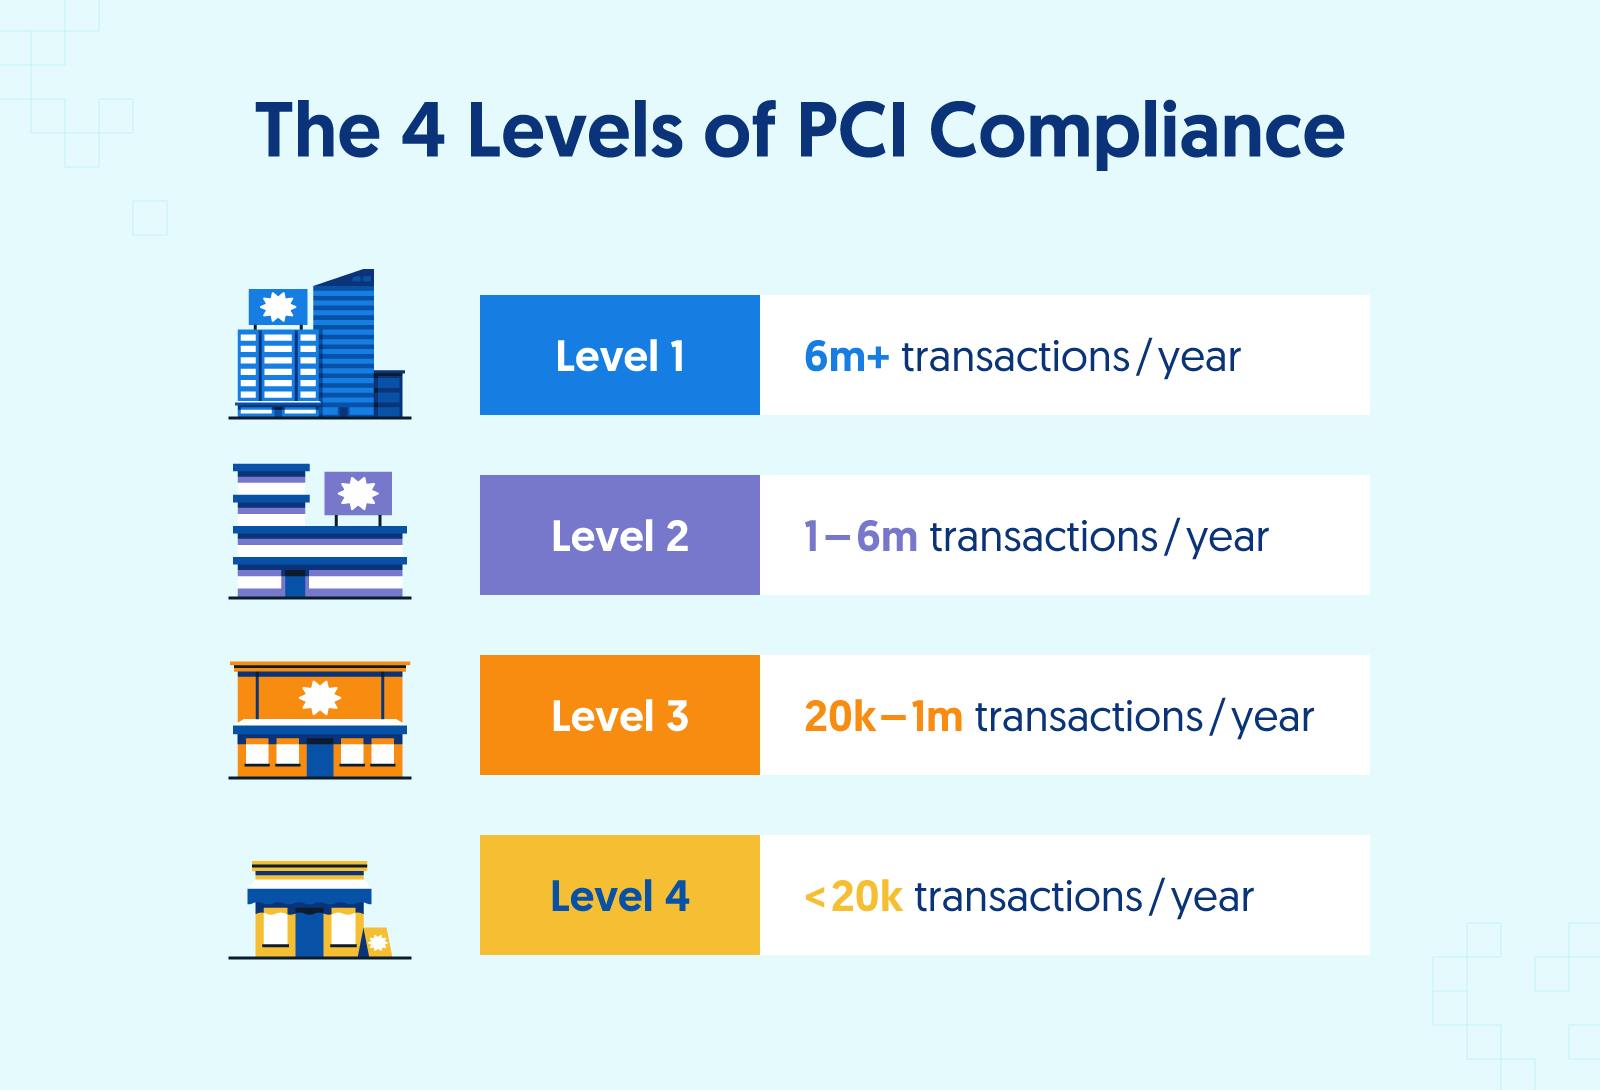 What is Level 4 PCI compliance?